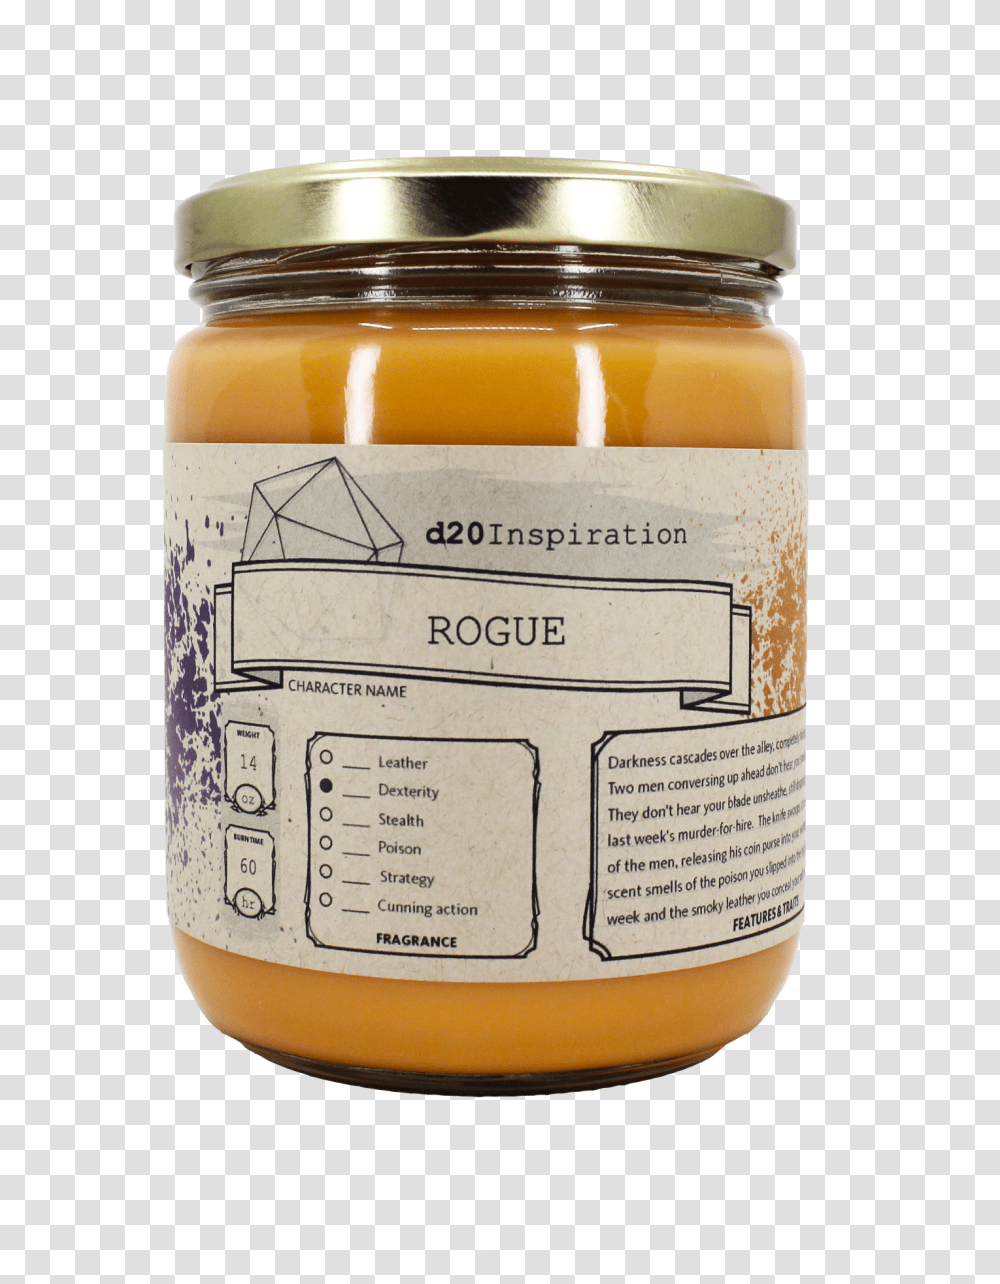 Rogue Rpg Soy Gaming Candle Paste, Food, Honey, Peanut Butter, Jar Transparent Png